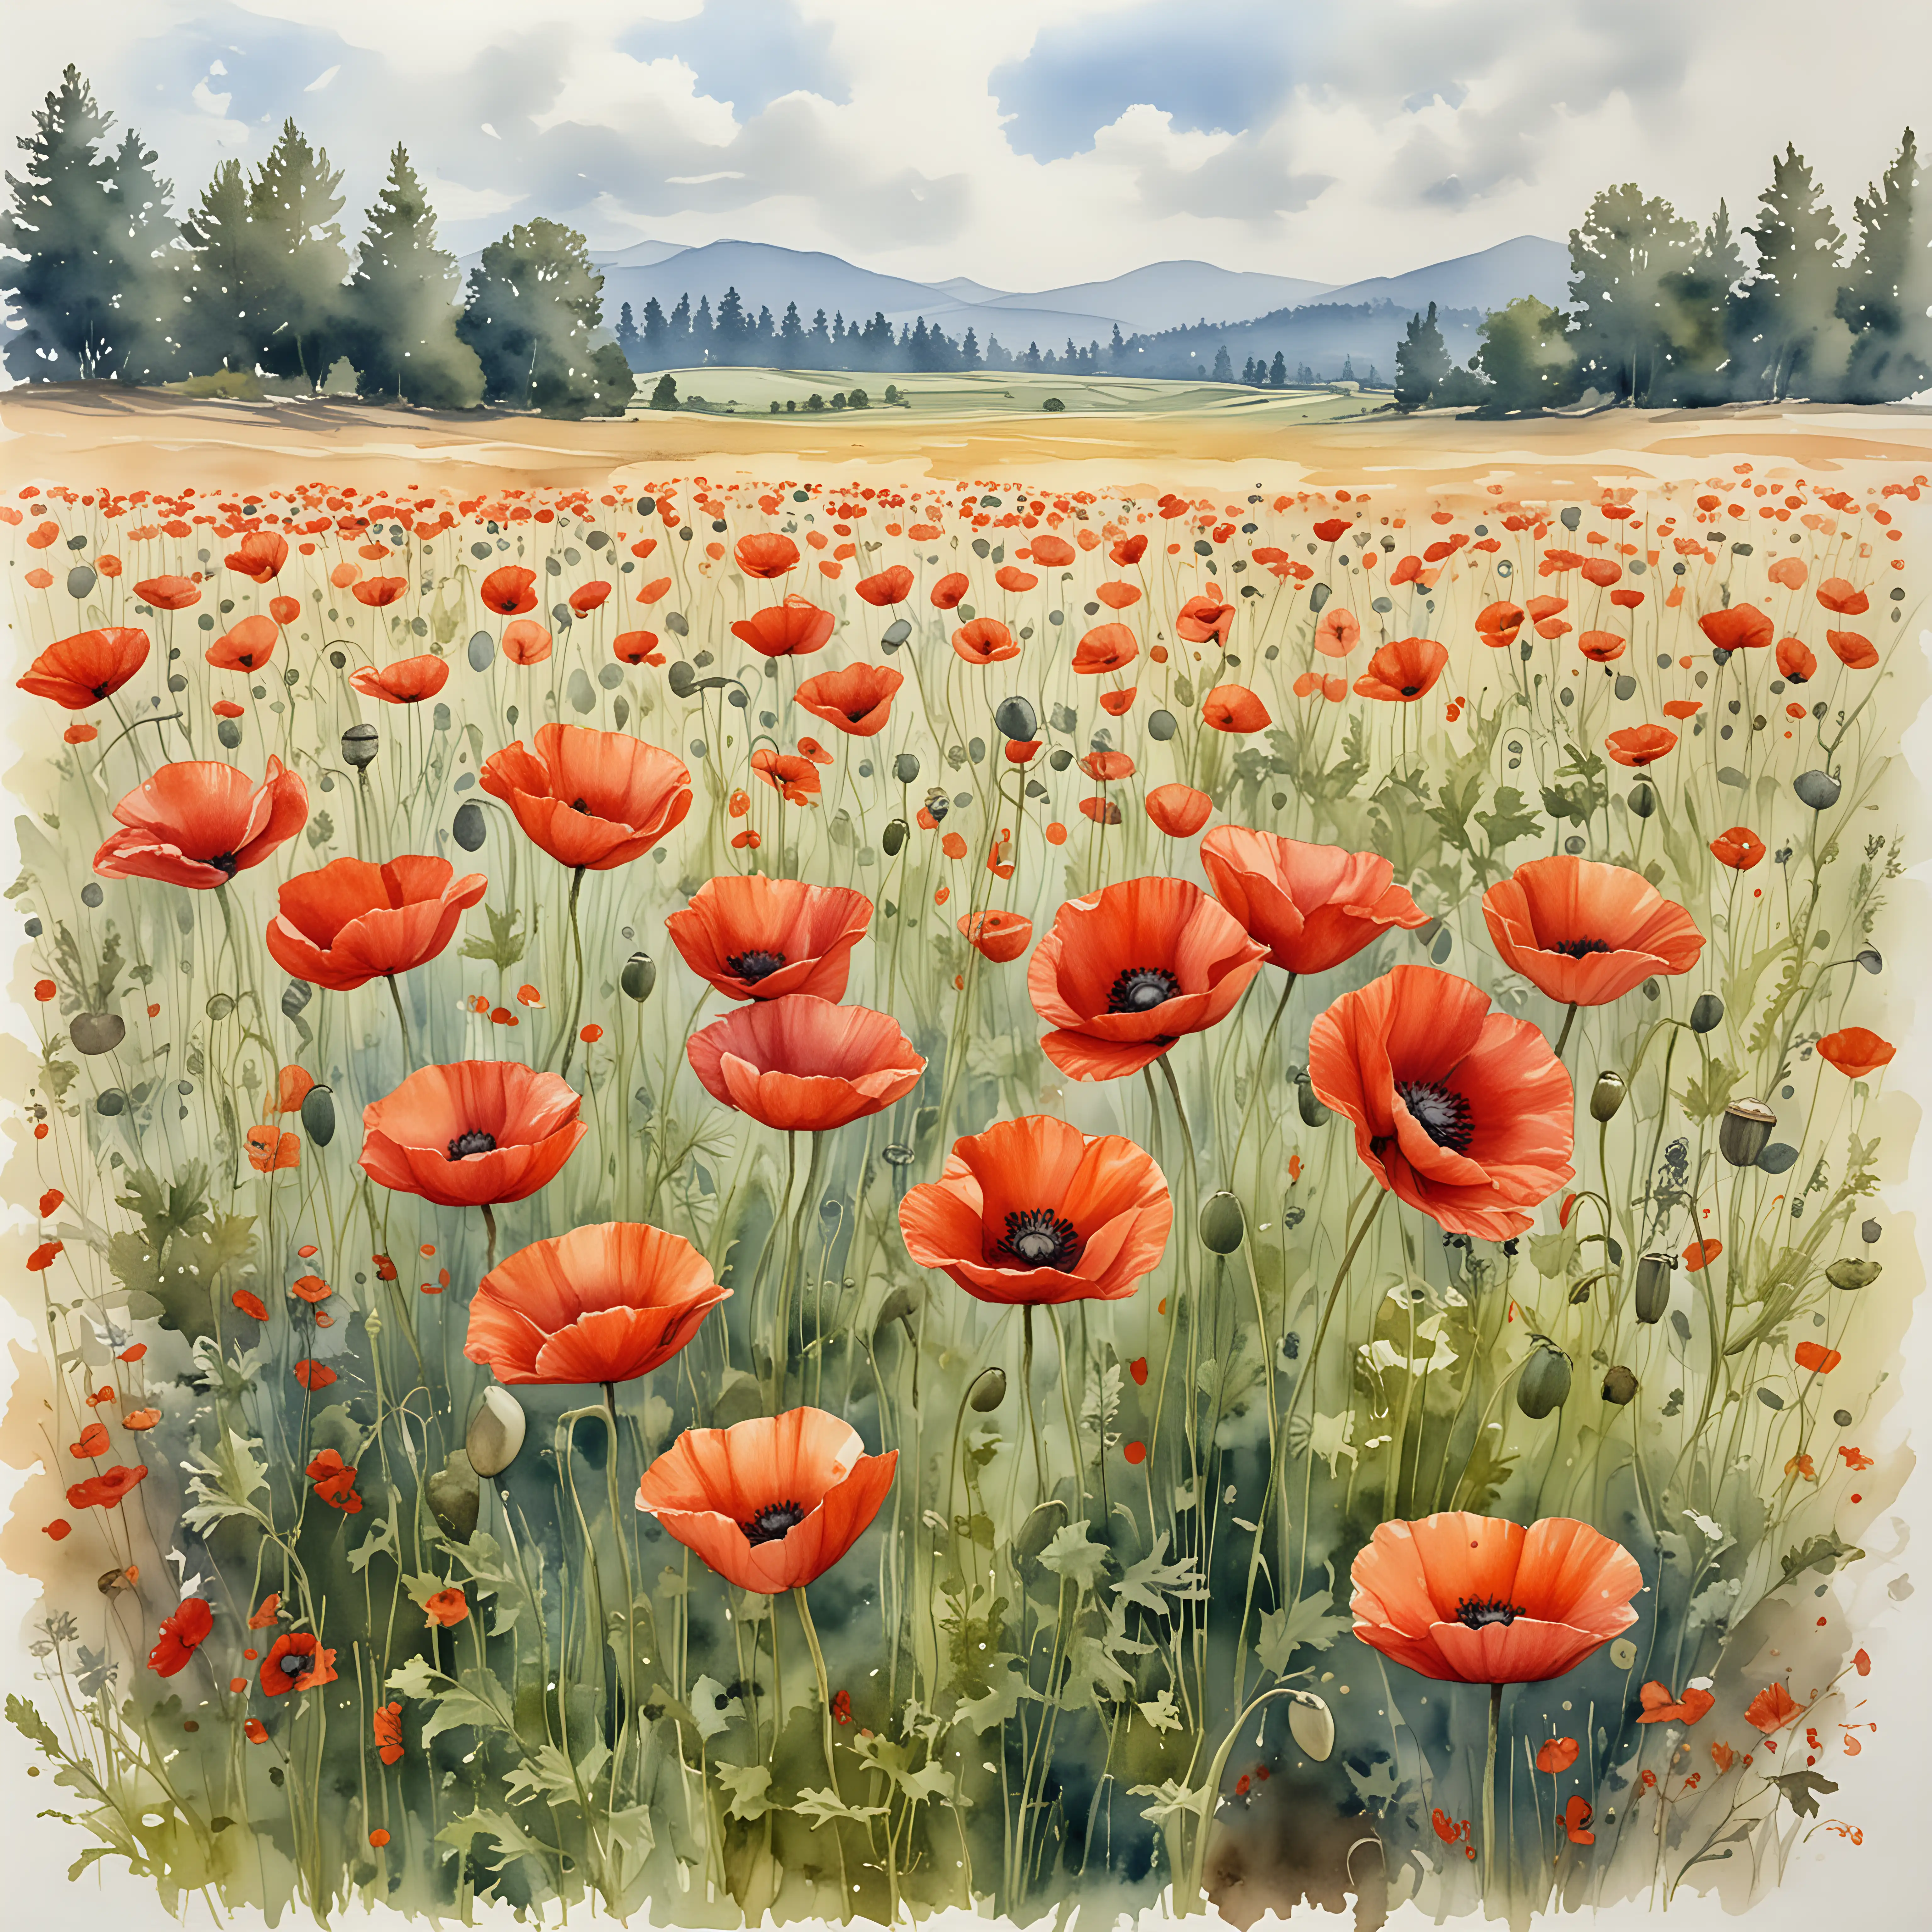 watercolor sketch of a field of poppies AND MUSHROOMS

